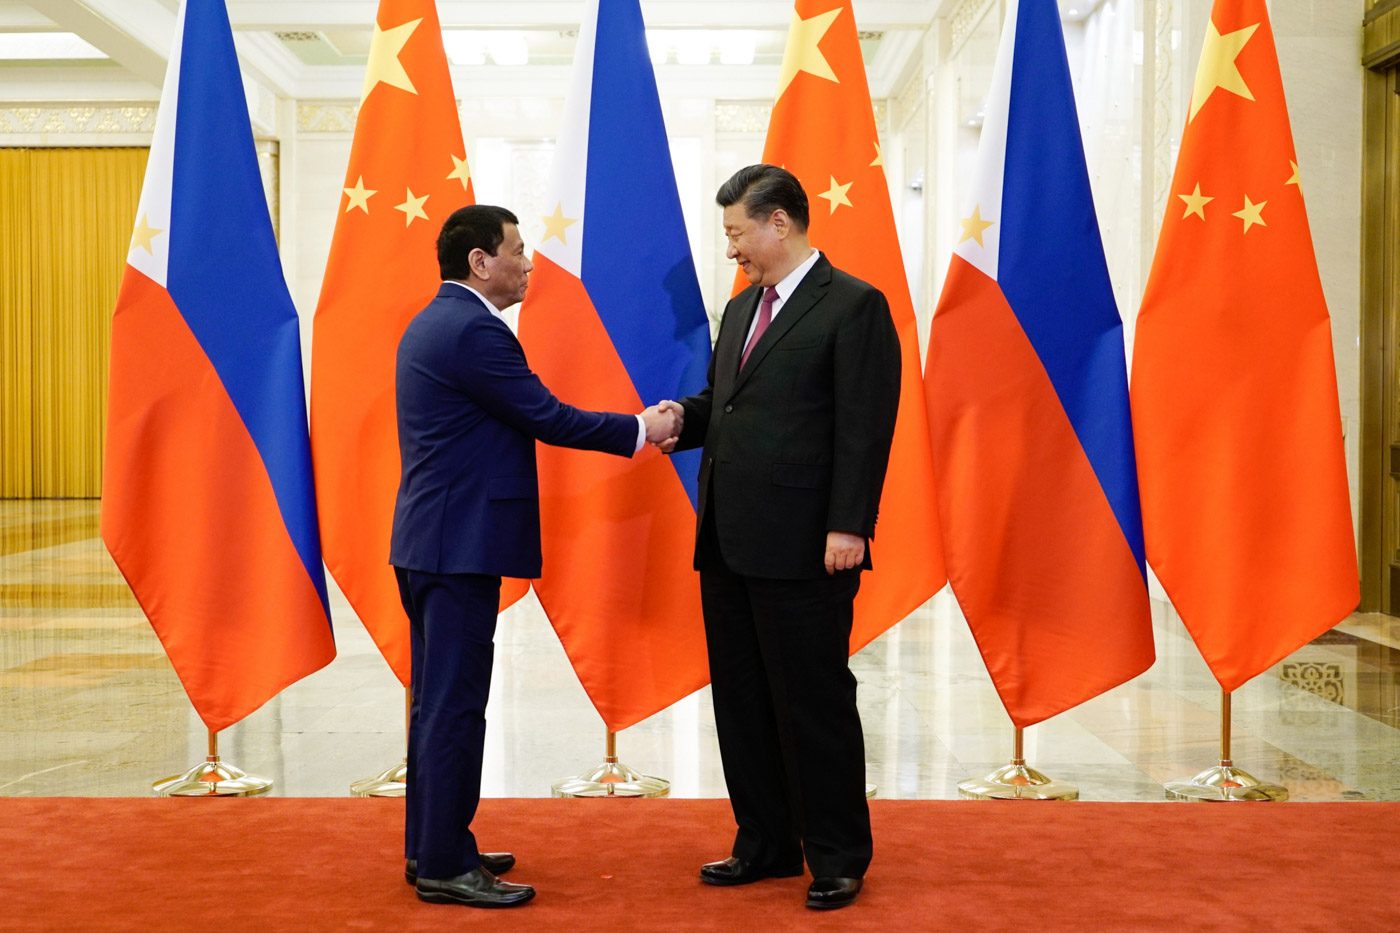 
PHILIPPINES-CHINA TIES. Philippine President Rodrigo Duterte and Chinese President Xi Jinping pose for a photo before the start of their bilateral meeting at the Great Hall of the People in Beijing on April 25, 2019. Malacañang photo 